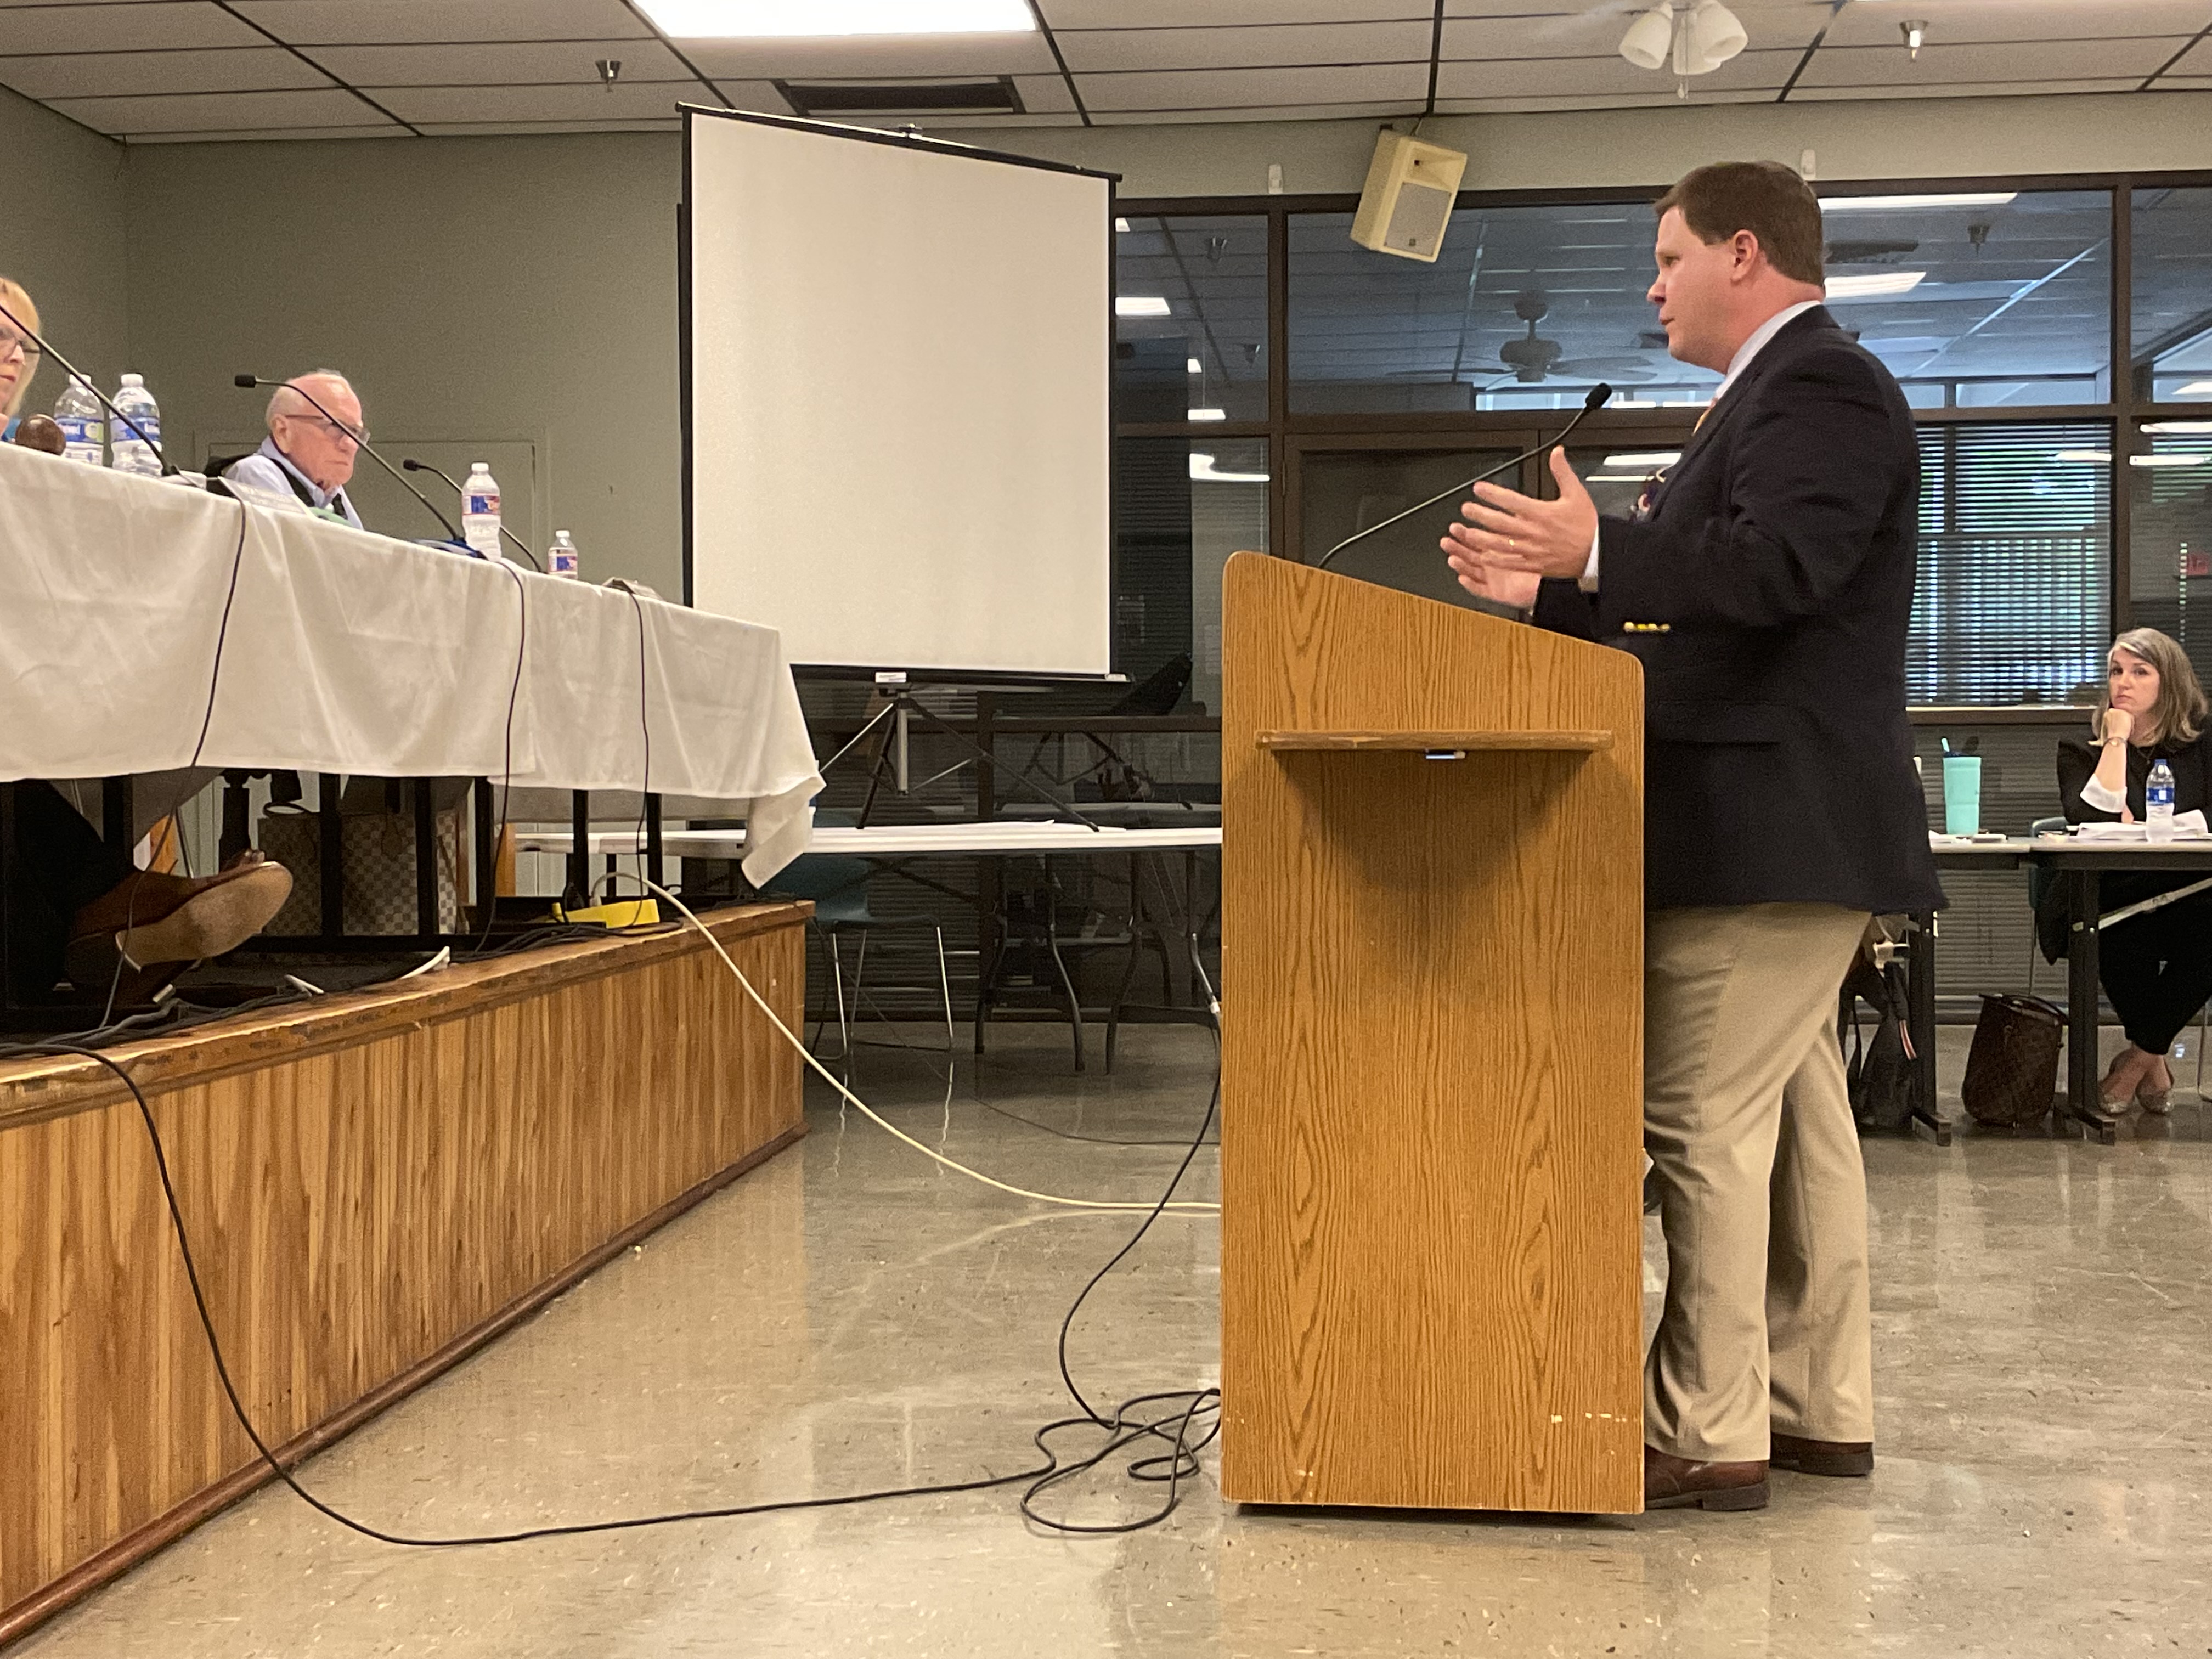 District II Councilman Skelly Kreller and Mayor Clay Madden face off during debate over the proposed contract to hire a disaster planner at the May 27, 2021, Mandeville City Council Meeting (Mandeville Daily/William Kropog)